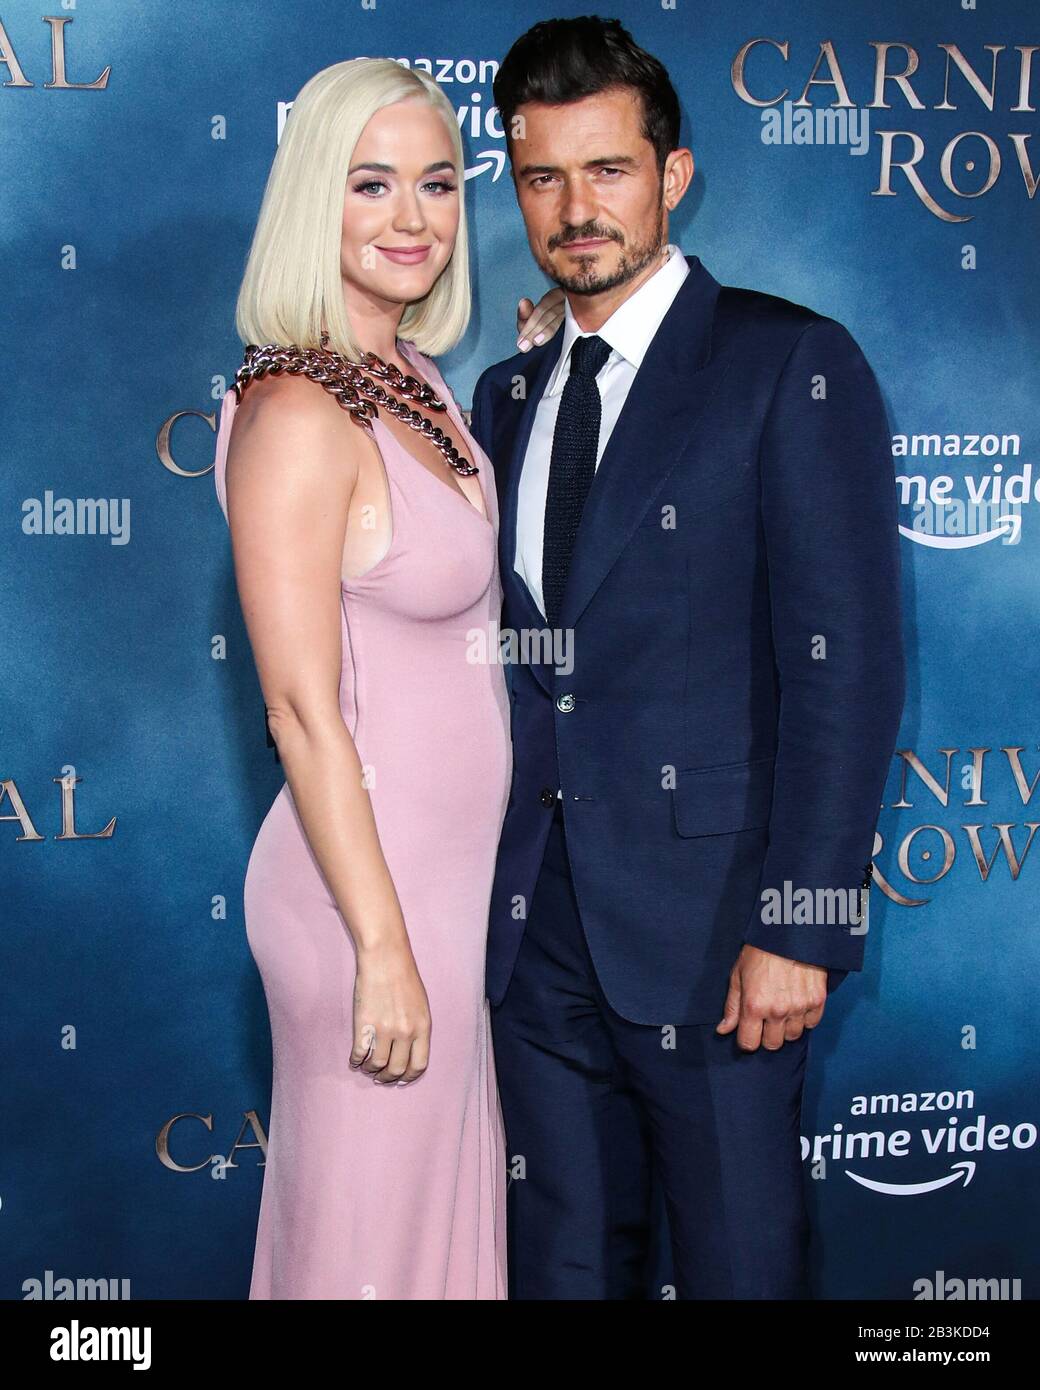 Hollywood, United States. 05th Mar, 2020. (FILE) Katy Perry Expecting First  Baby With Fiance Orlando Bloom. Katy Perry has revealed that she is  expecting a baby with her fiancé Orlando Bloom. HOLLYWOOD,